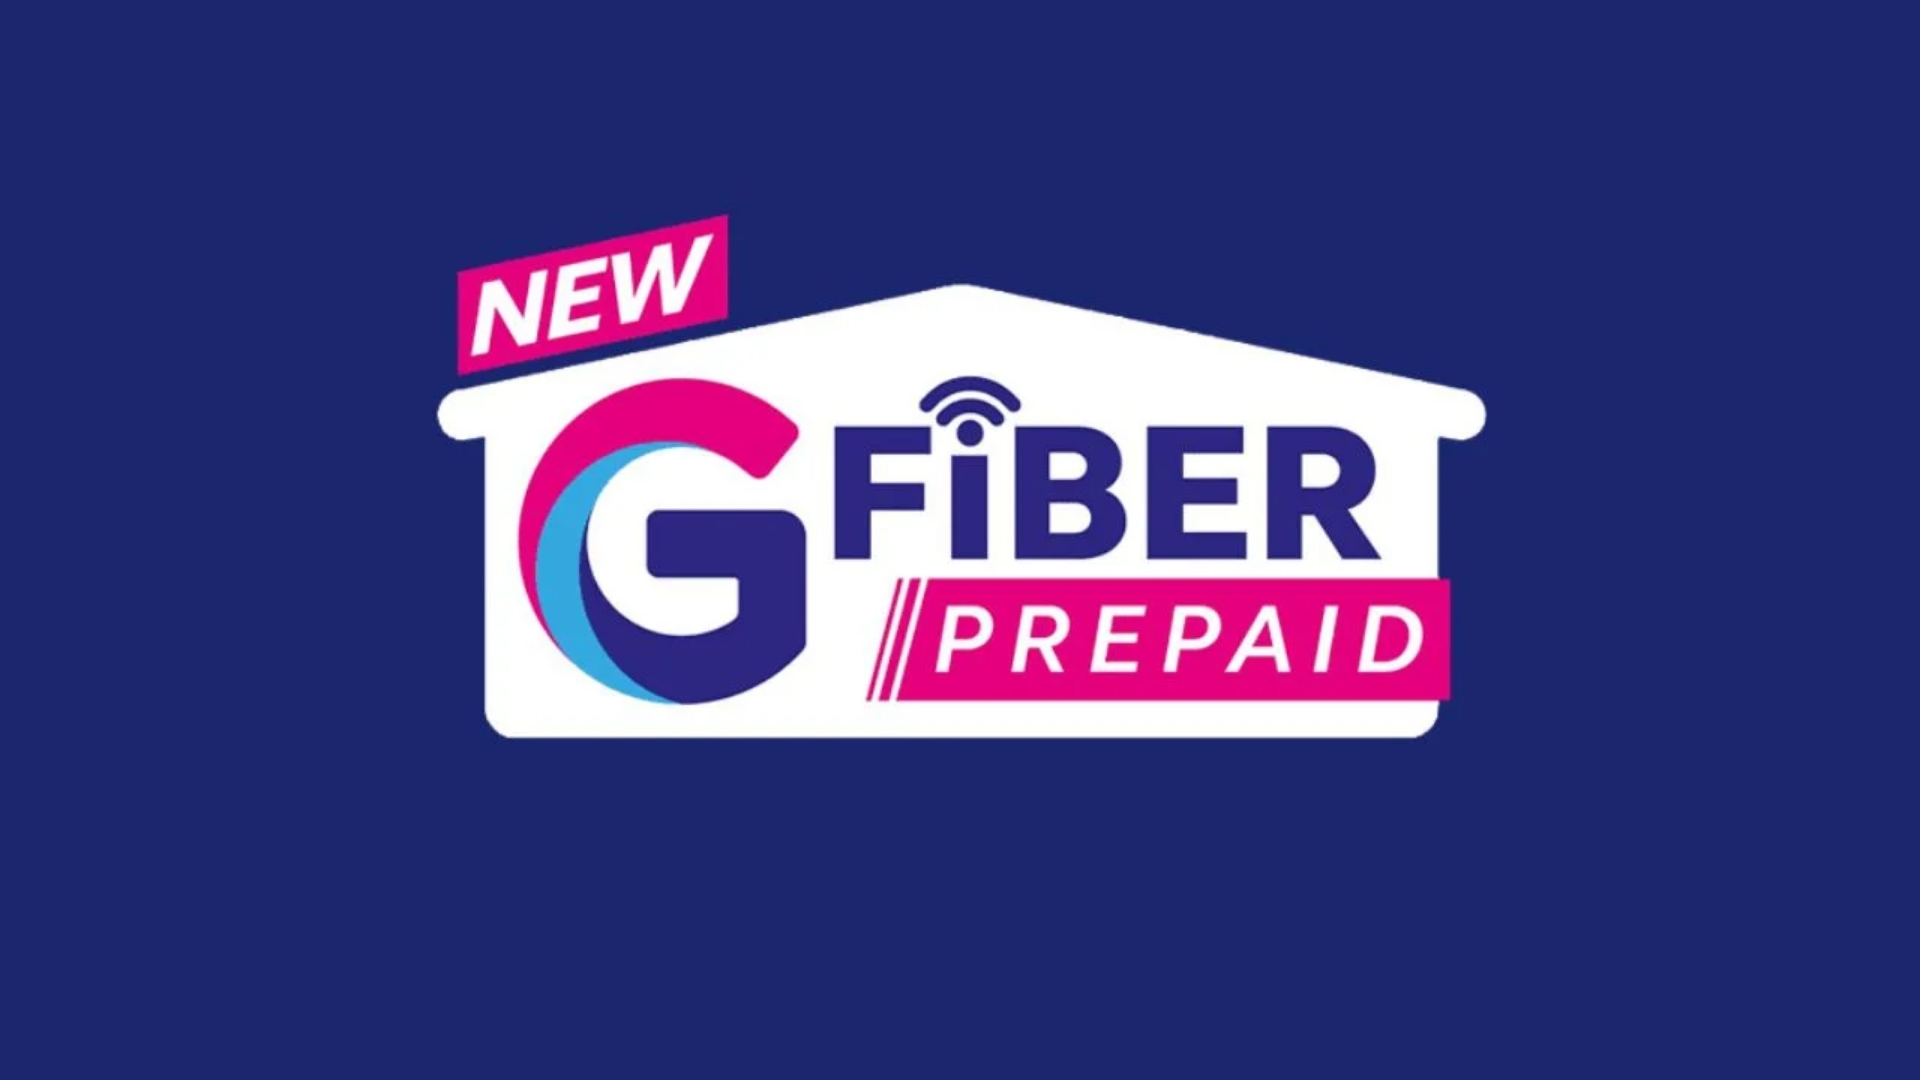 50Mbps GFiber speeds are available for as Php33 per day with Globe at Home.